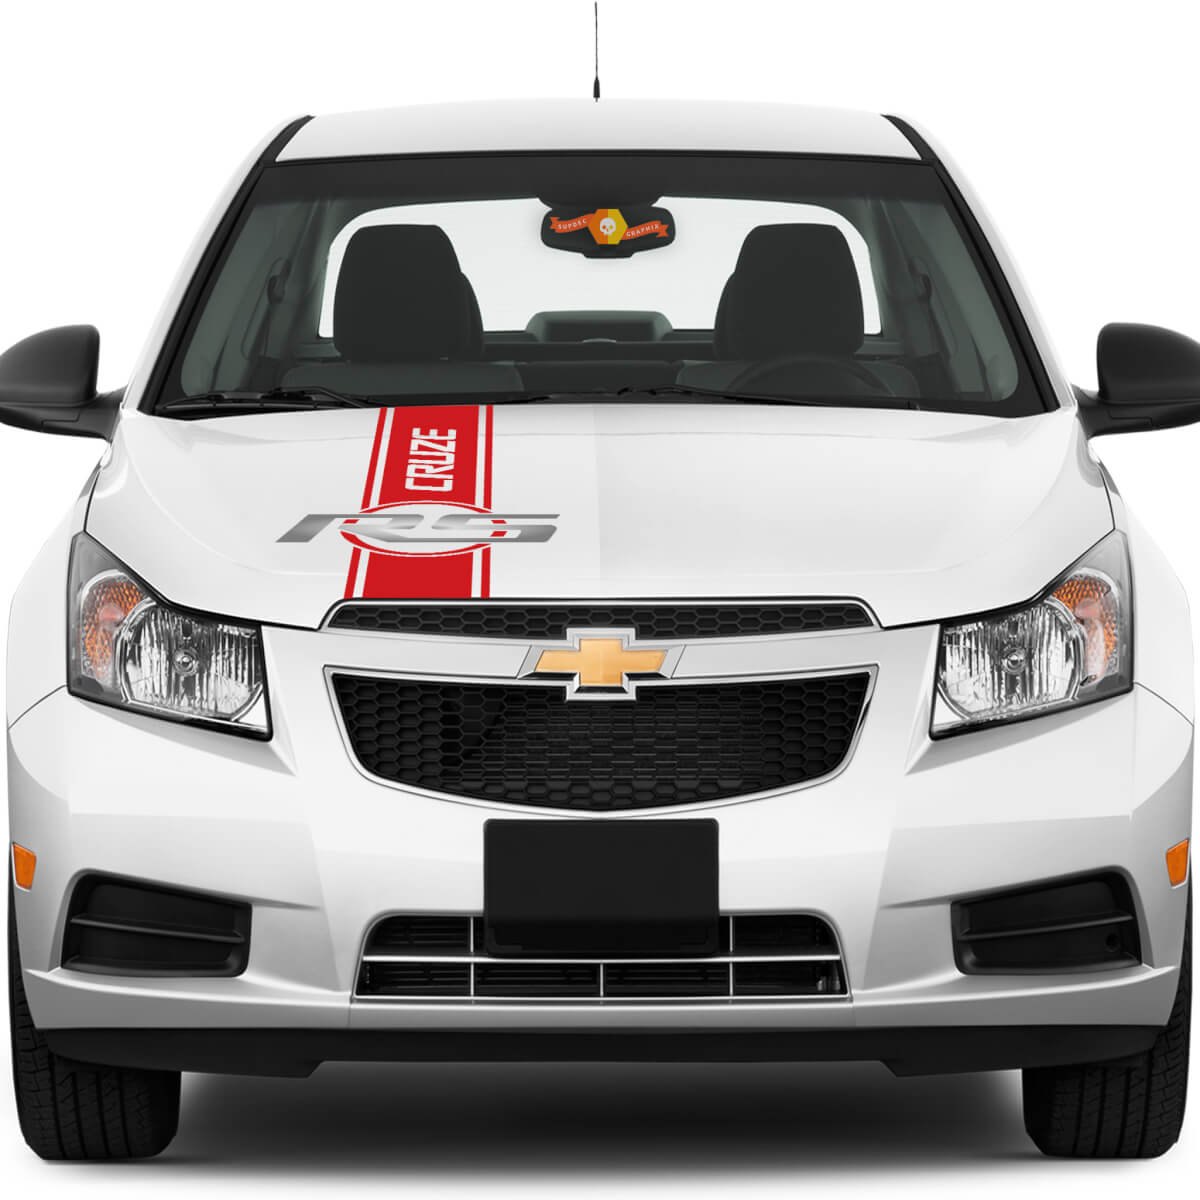 2 Colour Chevrolet Chevy Cruze RS - Rally Racing Stripe Hood Graphic Cruze  lettering